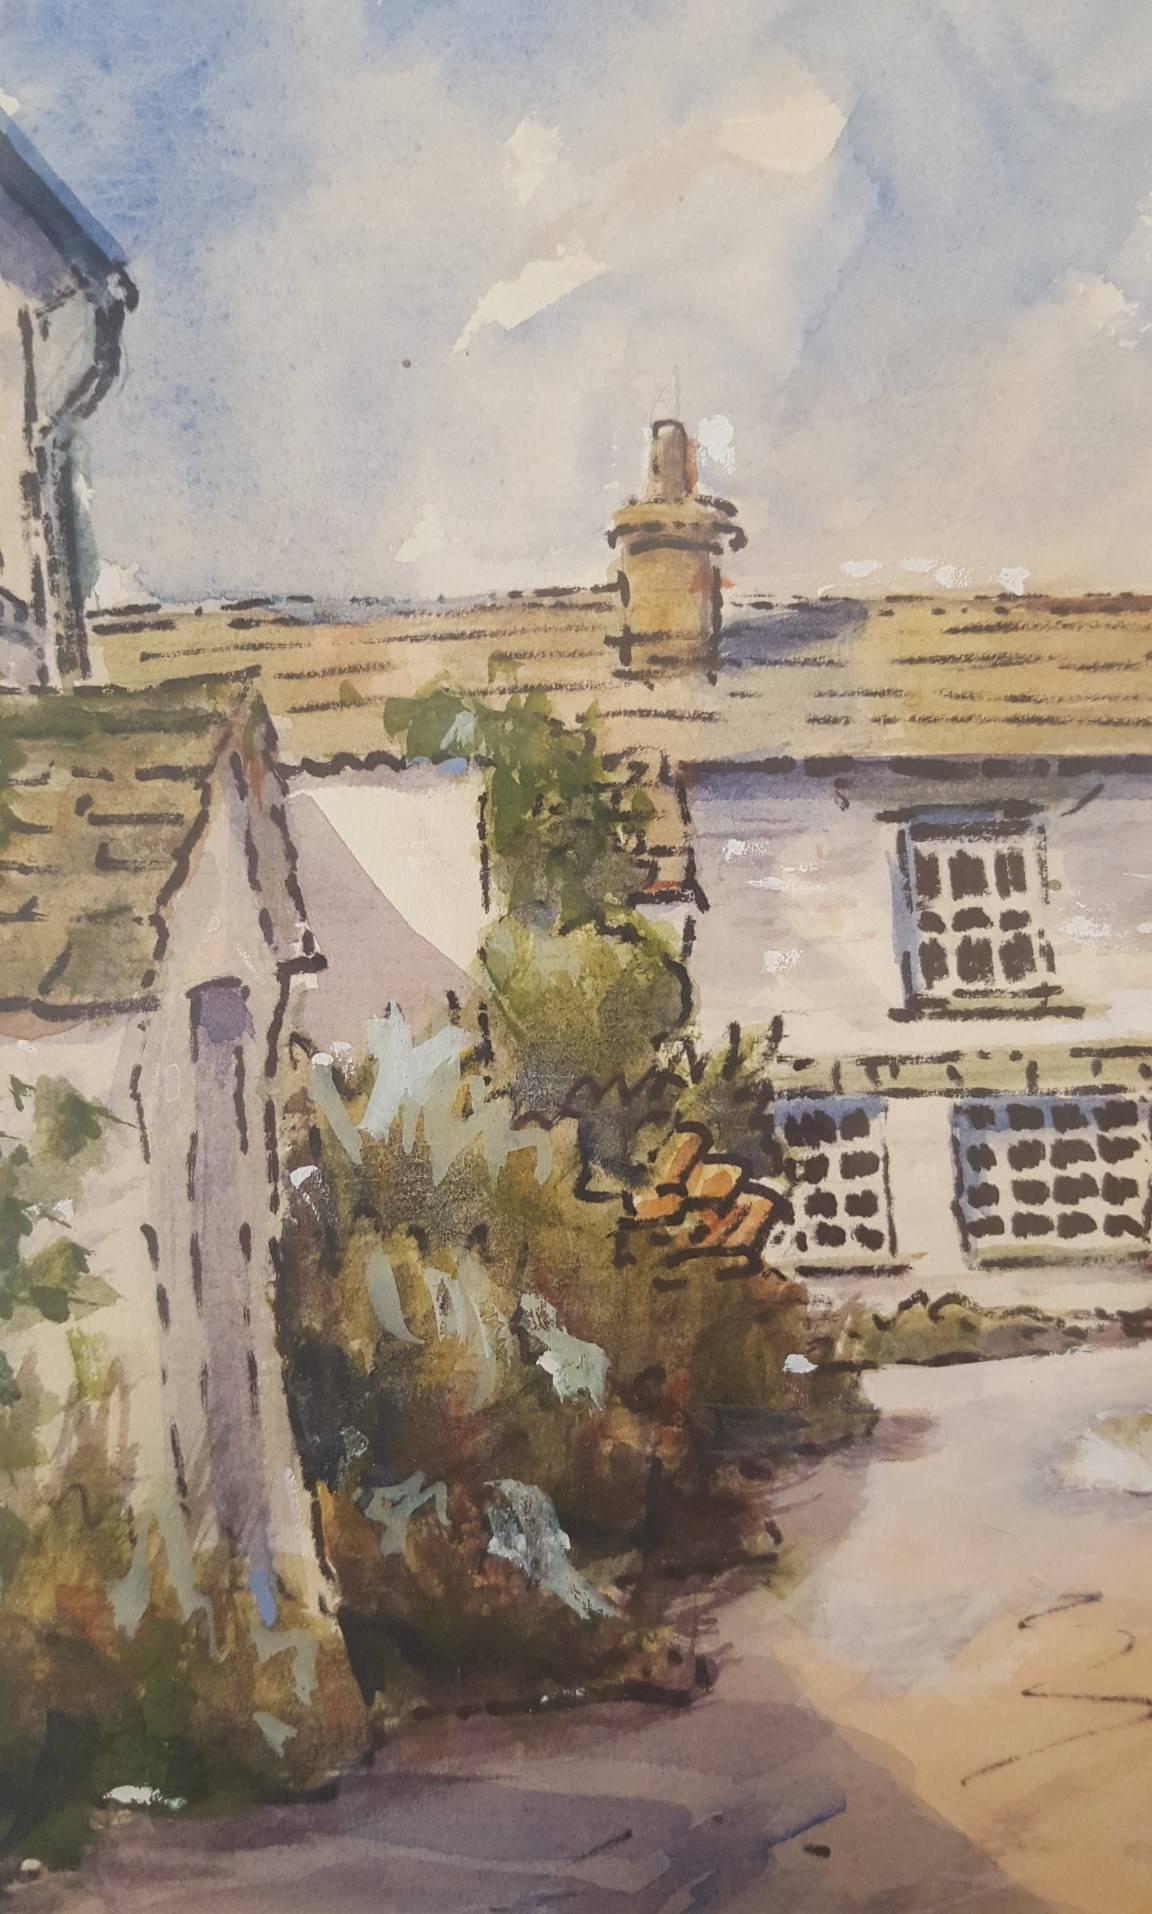 An original signed watercolor by English artist A. J. Mayhew titled "Borwick Fold, Cumbria", 1985. Hand signed by Mayhew lower right. Dated August of 1985 on verso. This work is in mint condition. It is frame ready: it has been matted with